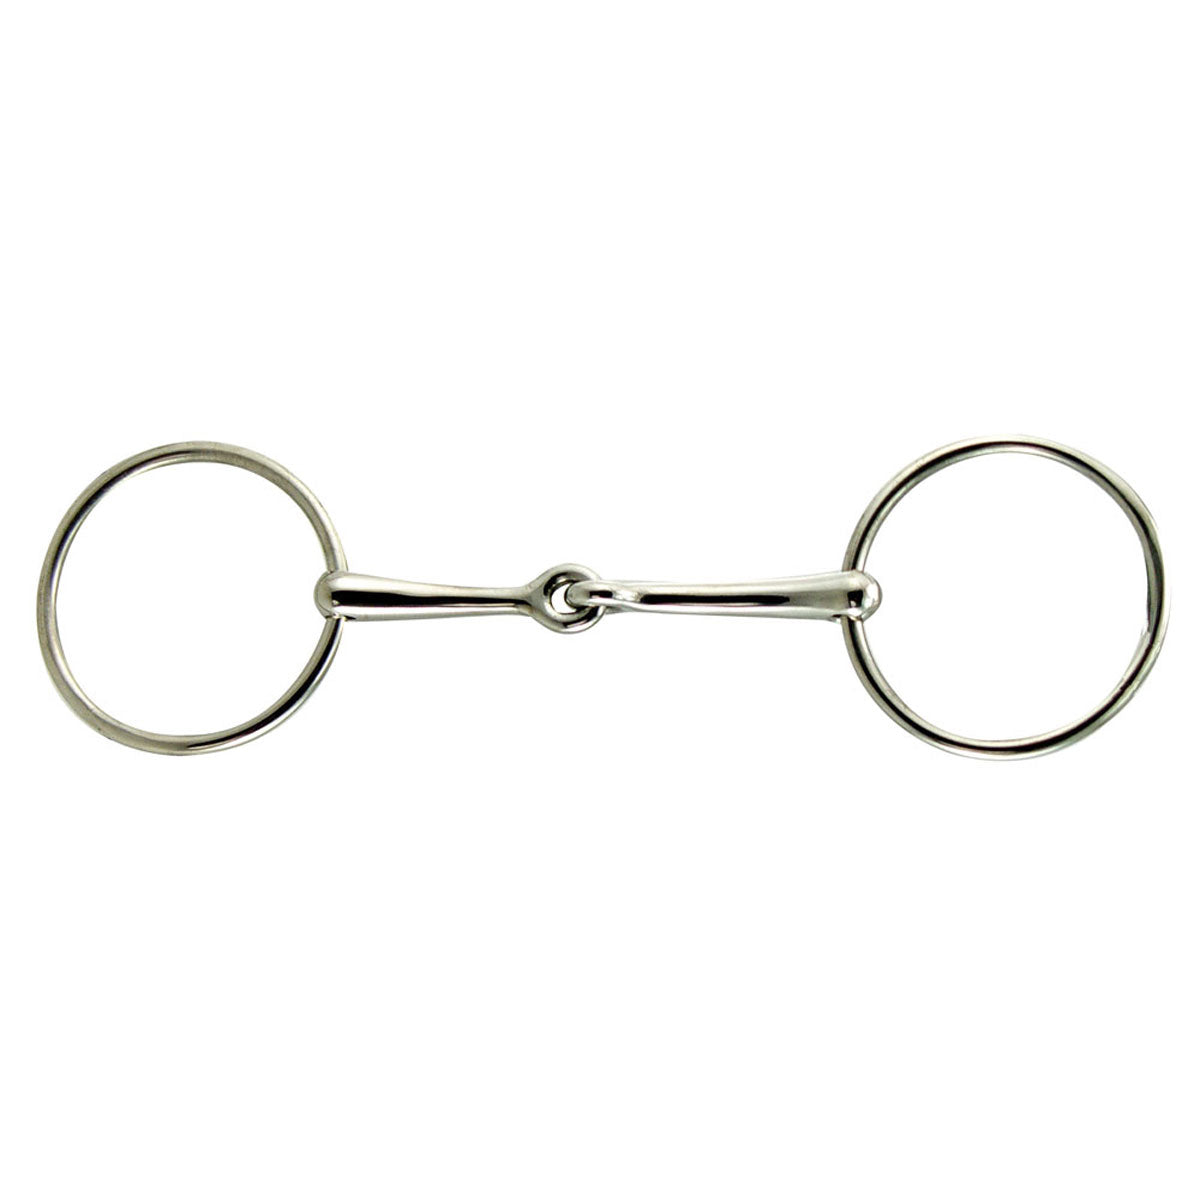 Light Weight Loose Ring Stainless Steel Snaffle Bit